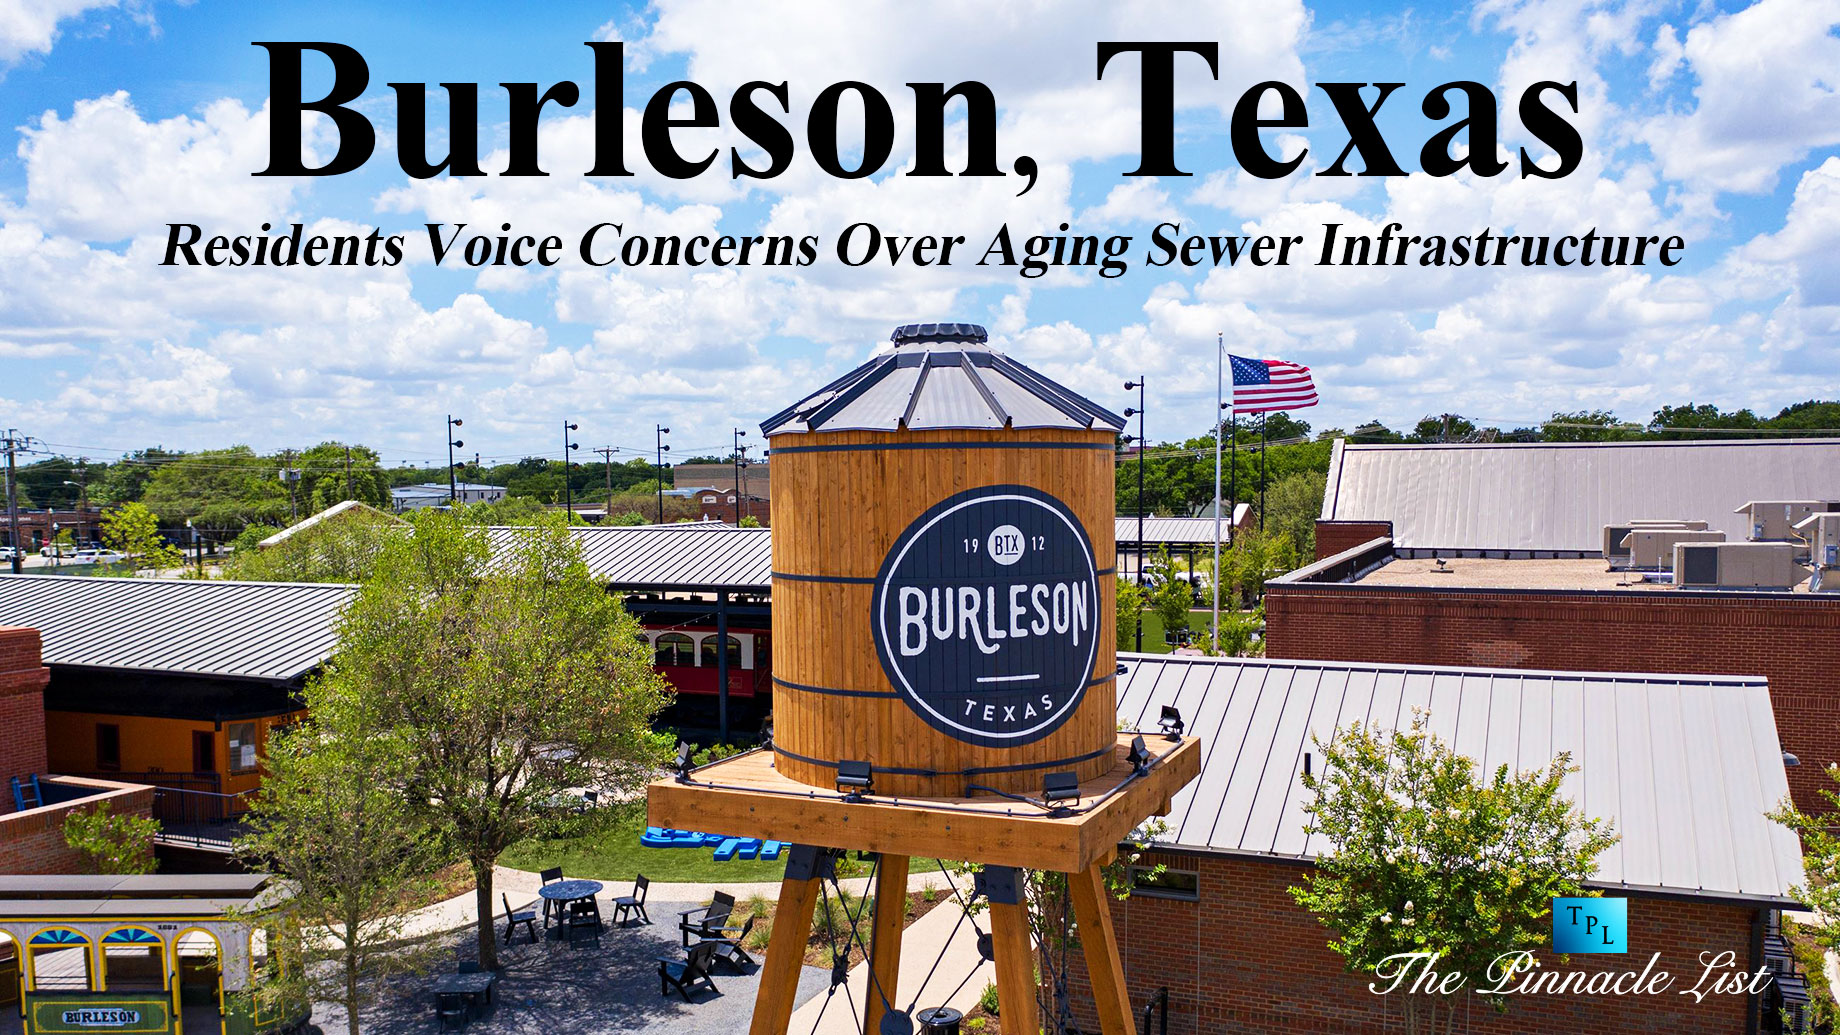 Burleson, Texas: Residents Voice Concerns Over Aging Sewer Infrastructure